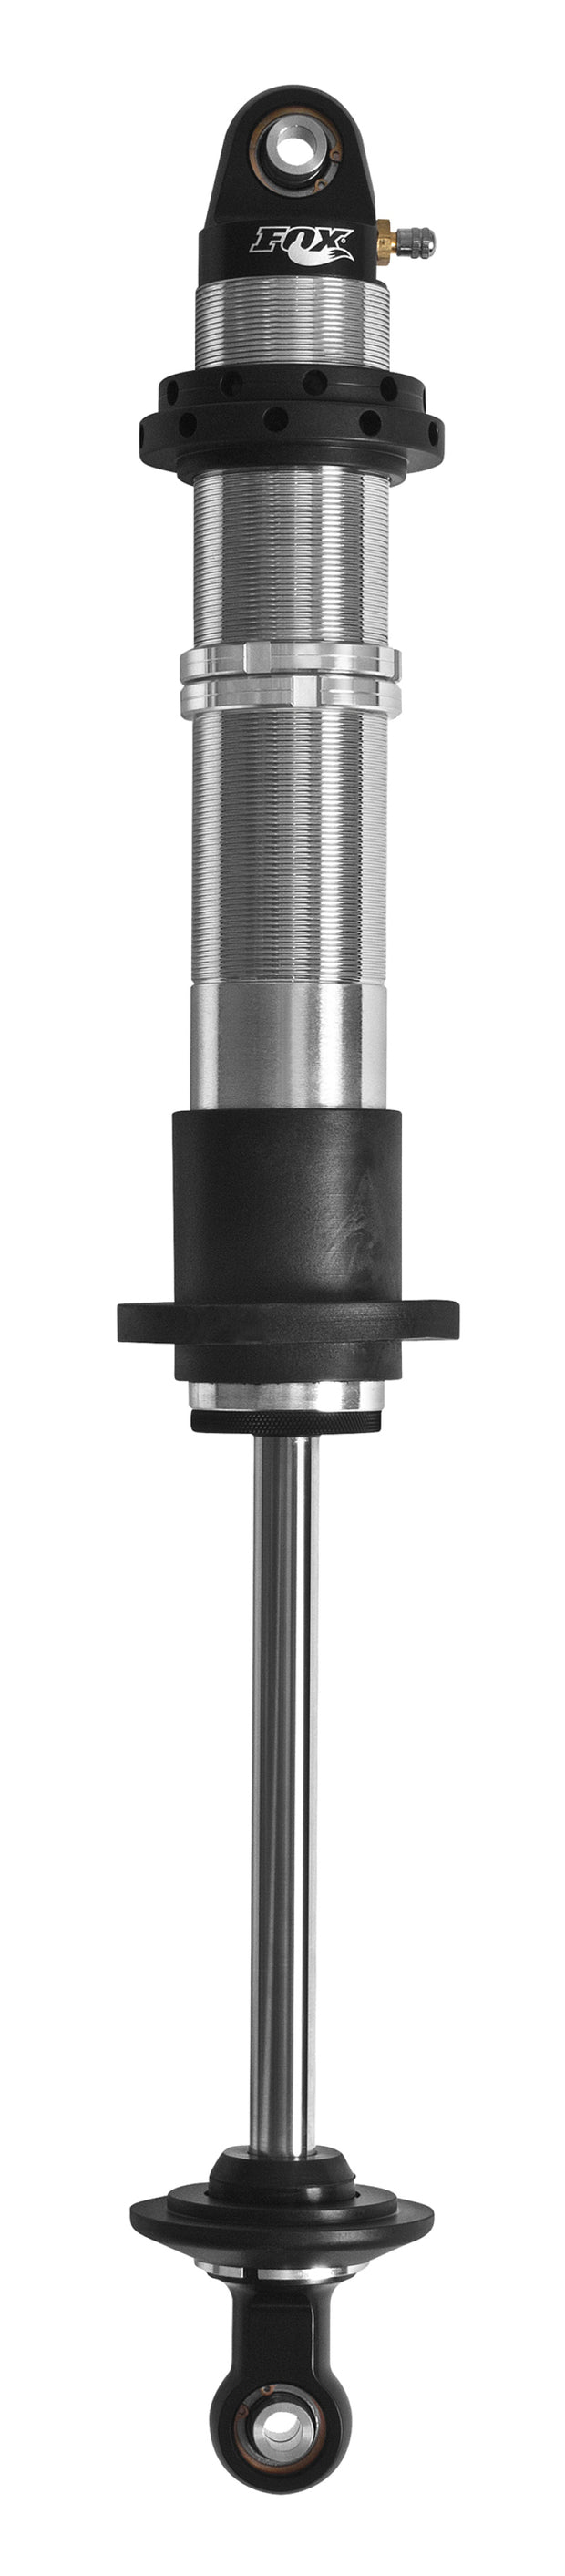 Fox 2.5 Factory Series 12in. Emulsion Coilover Shock 7/8in. Shaft (Normal Valving) 50/70 - Blk